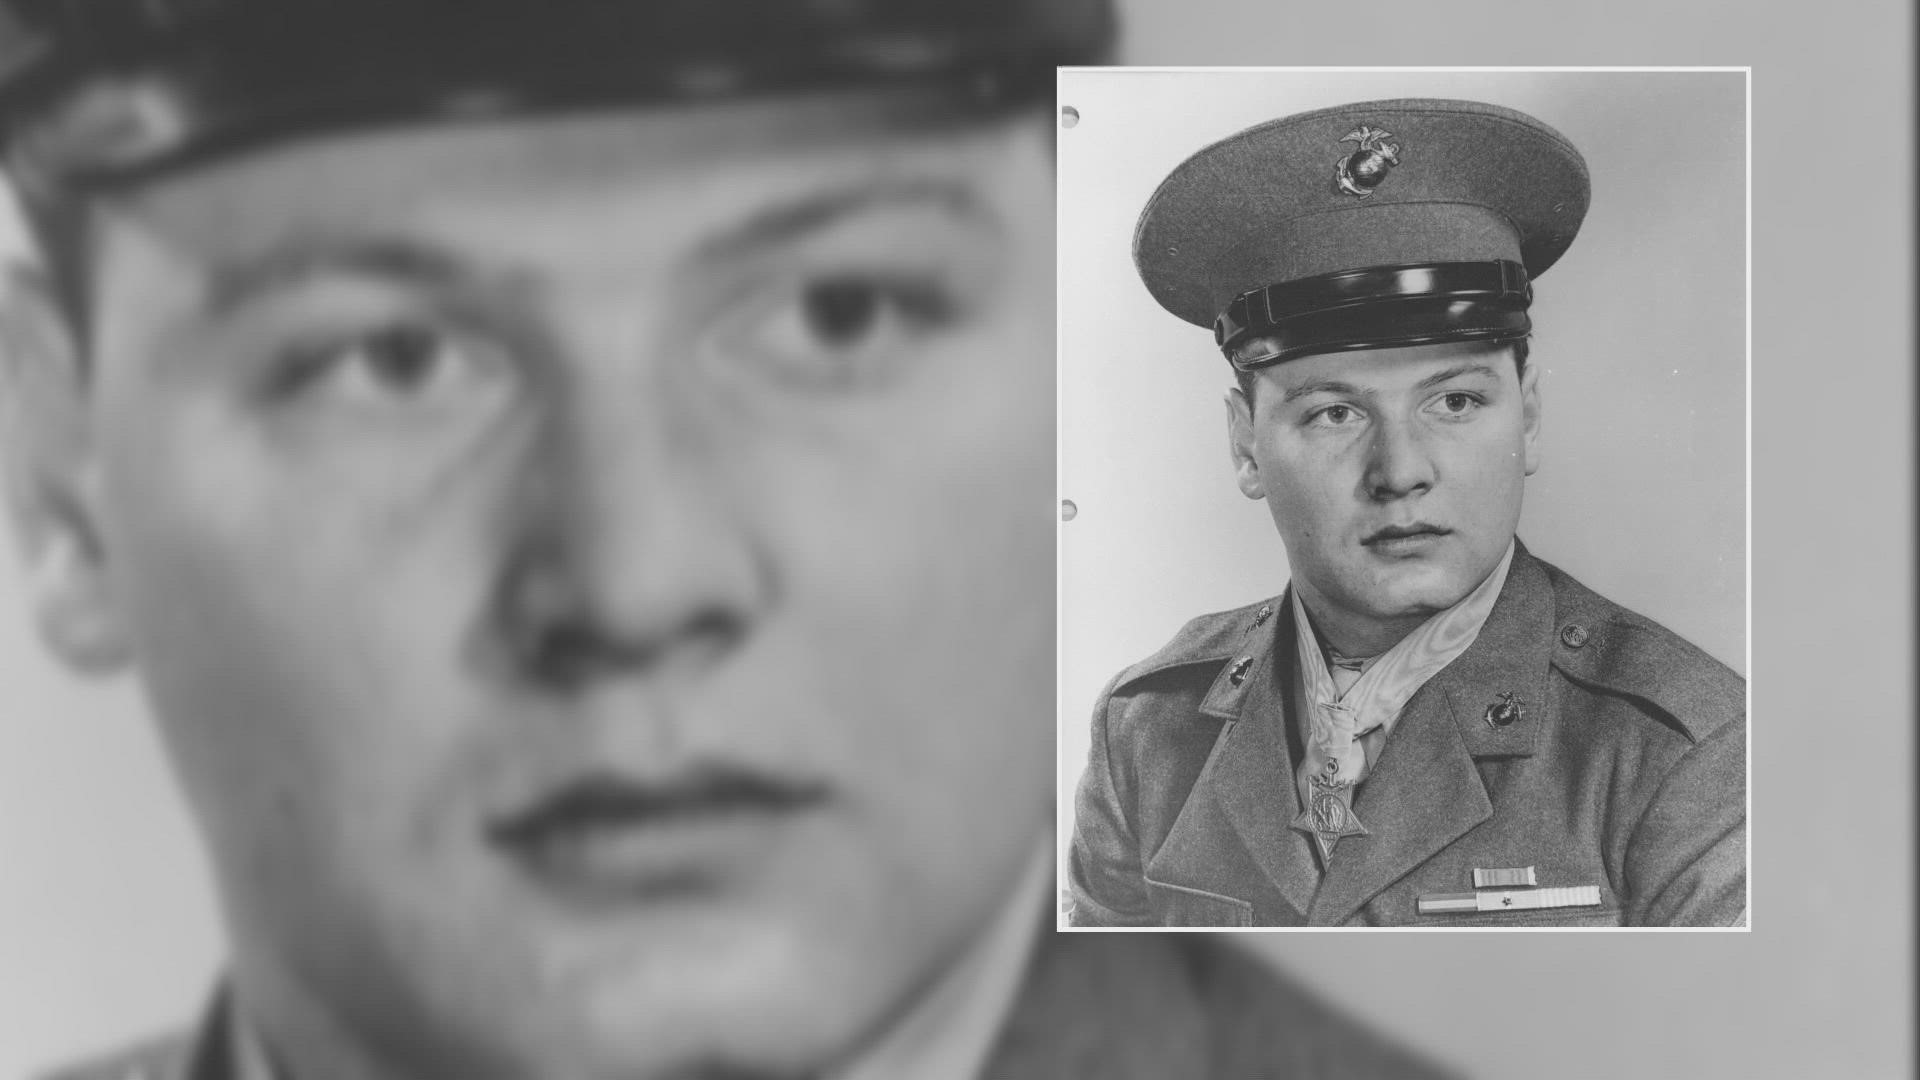 Duane E. Dewey was wounded by a grenade when a second grenade landed by him. He scooped it, put it under his hip and absorbed the blast, saving many soldier's lives.